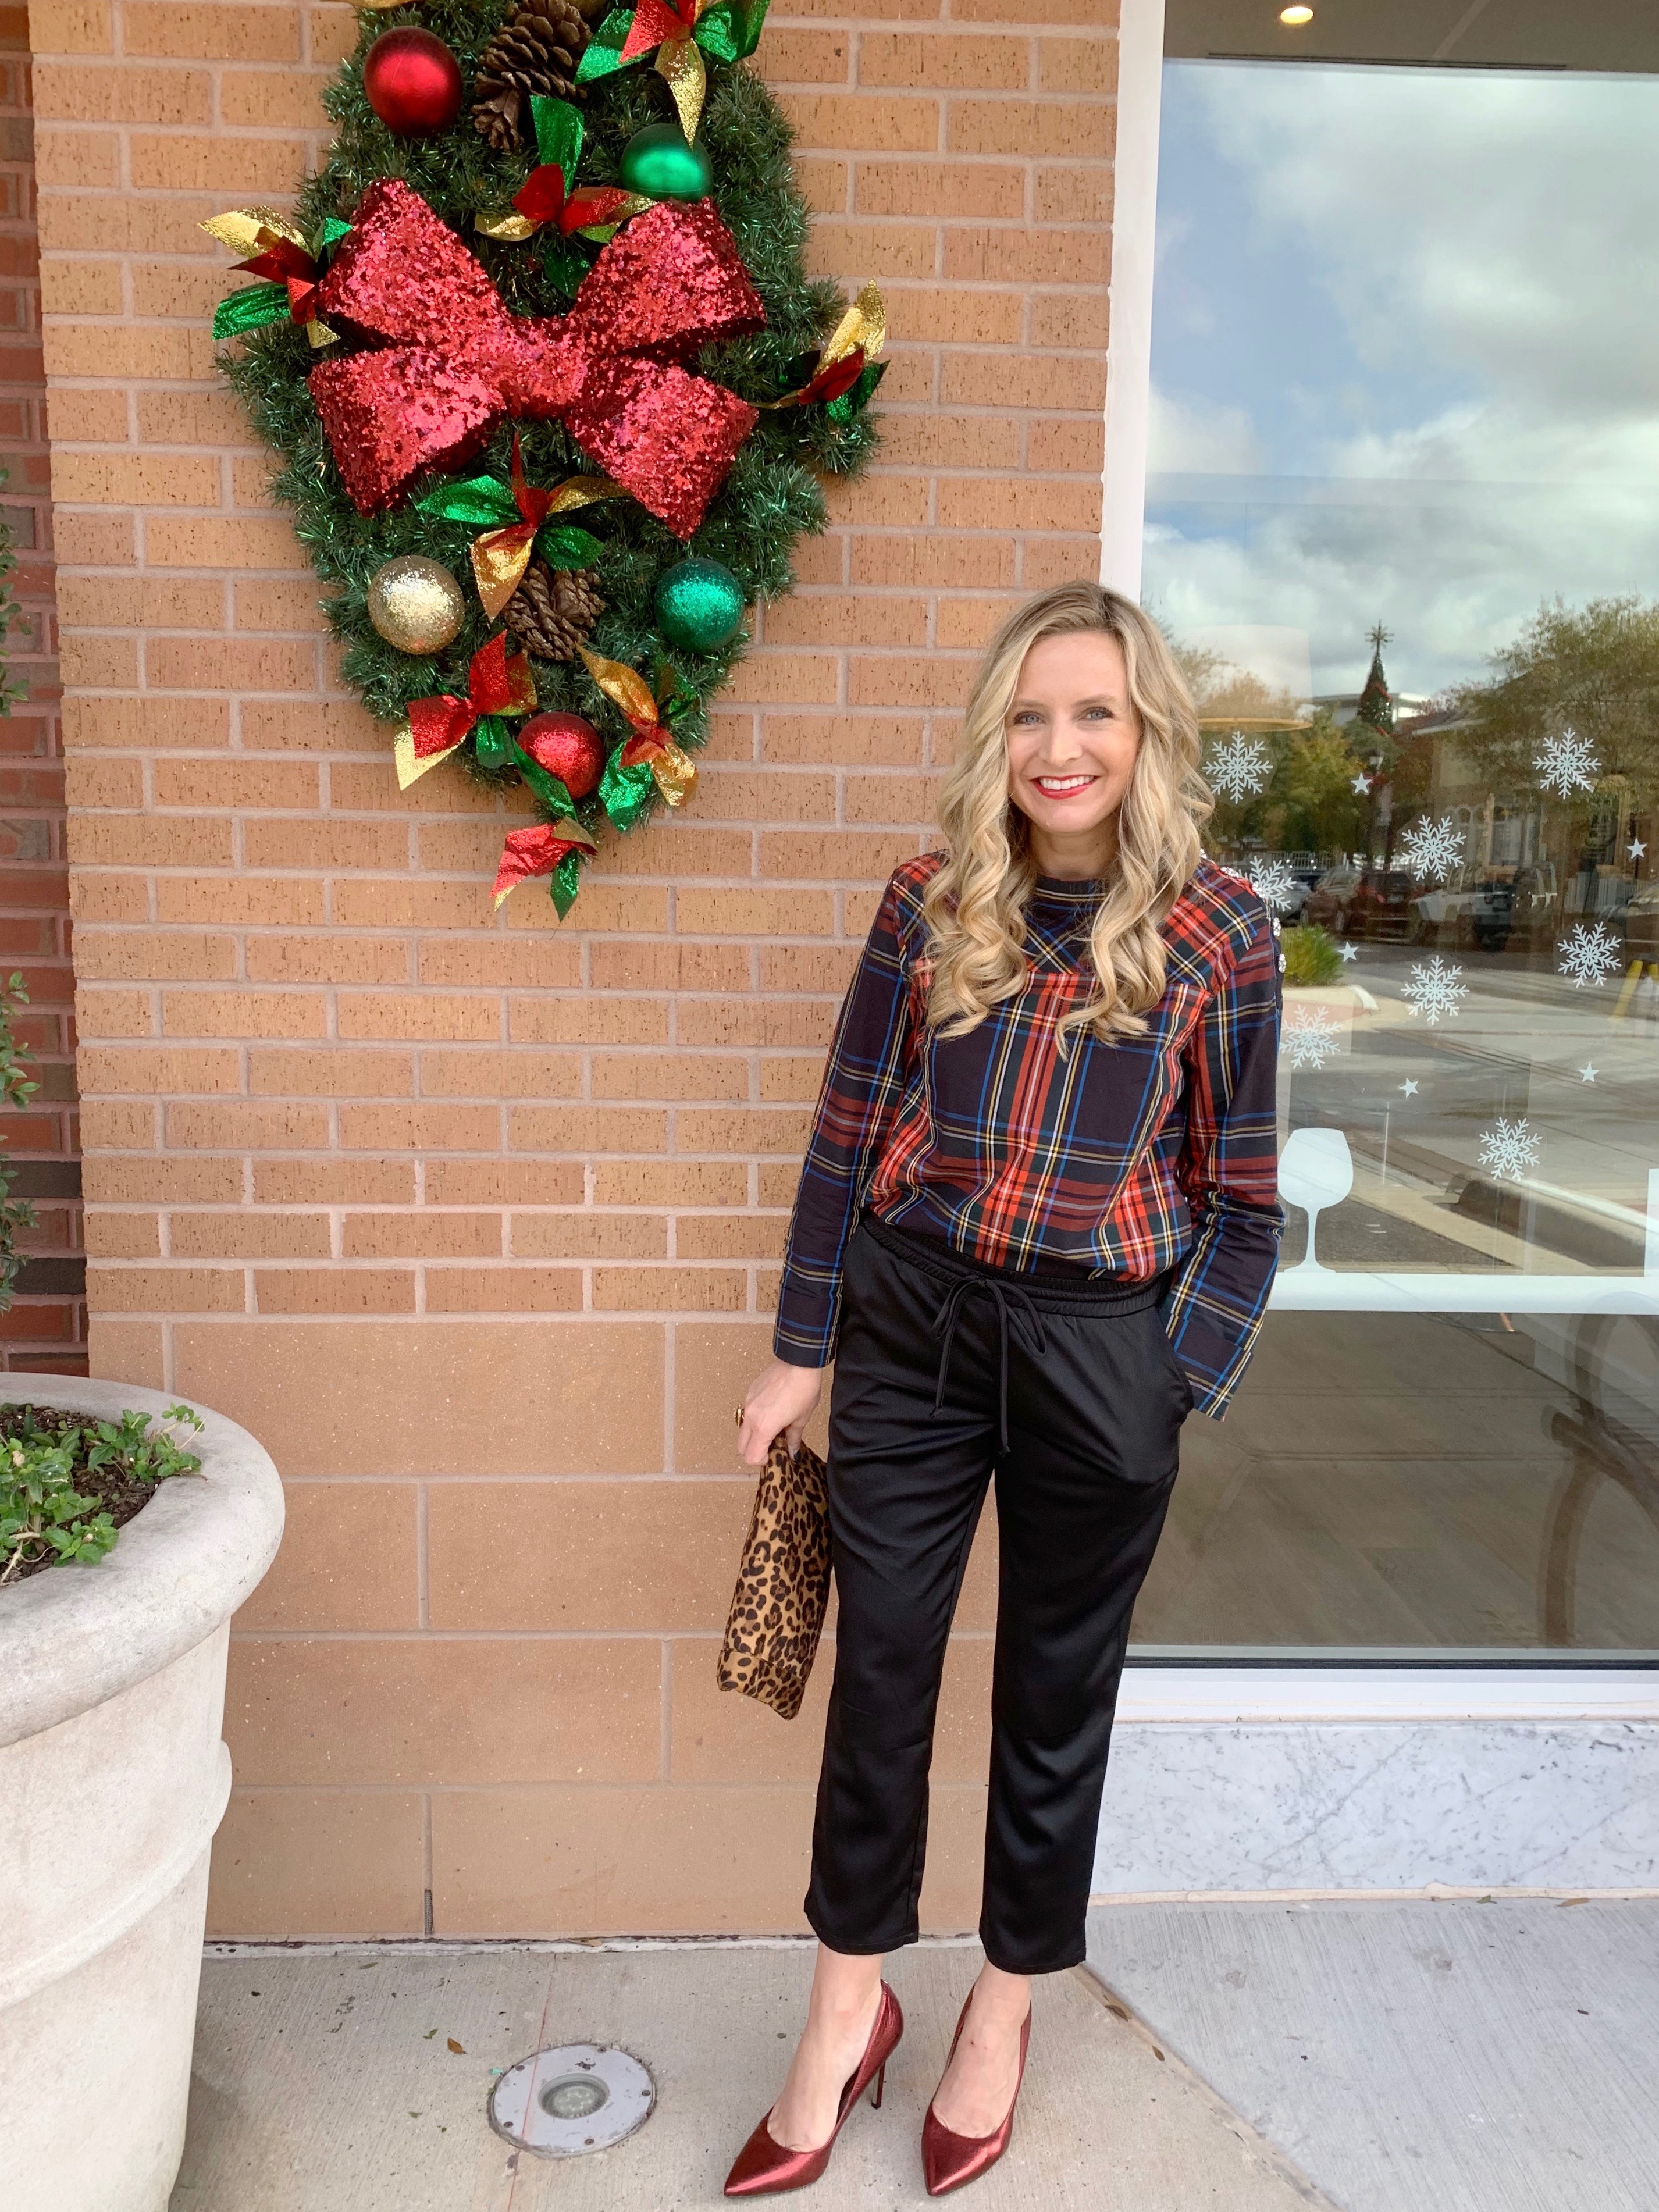 Top Houston fashion blogger, Fancy Ashley, features 7 Holiday Outfits perfect for the season: image of a woman wearing J.Crew plaid shirt, black jogger pants, Kate Spade earrings, leopard clutch and sam Edelman leopard pumps all available at Nordstrom